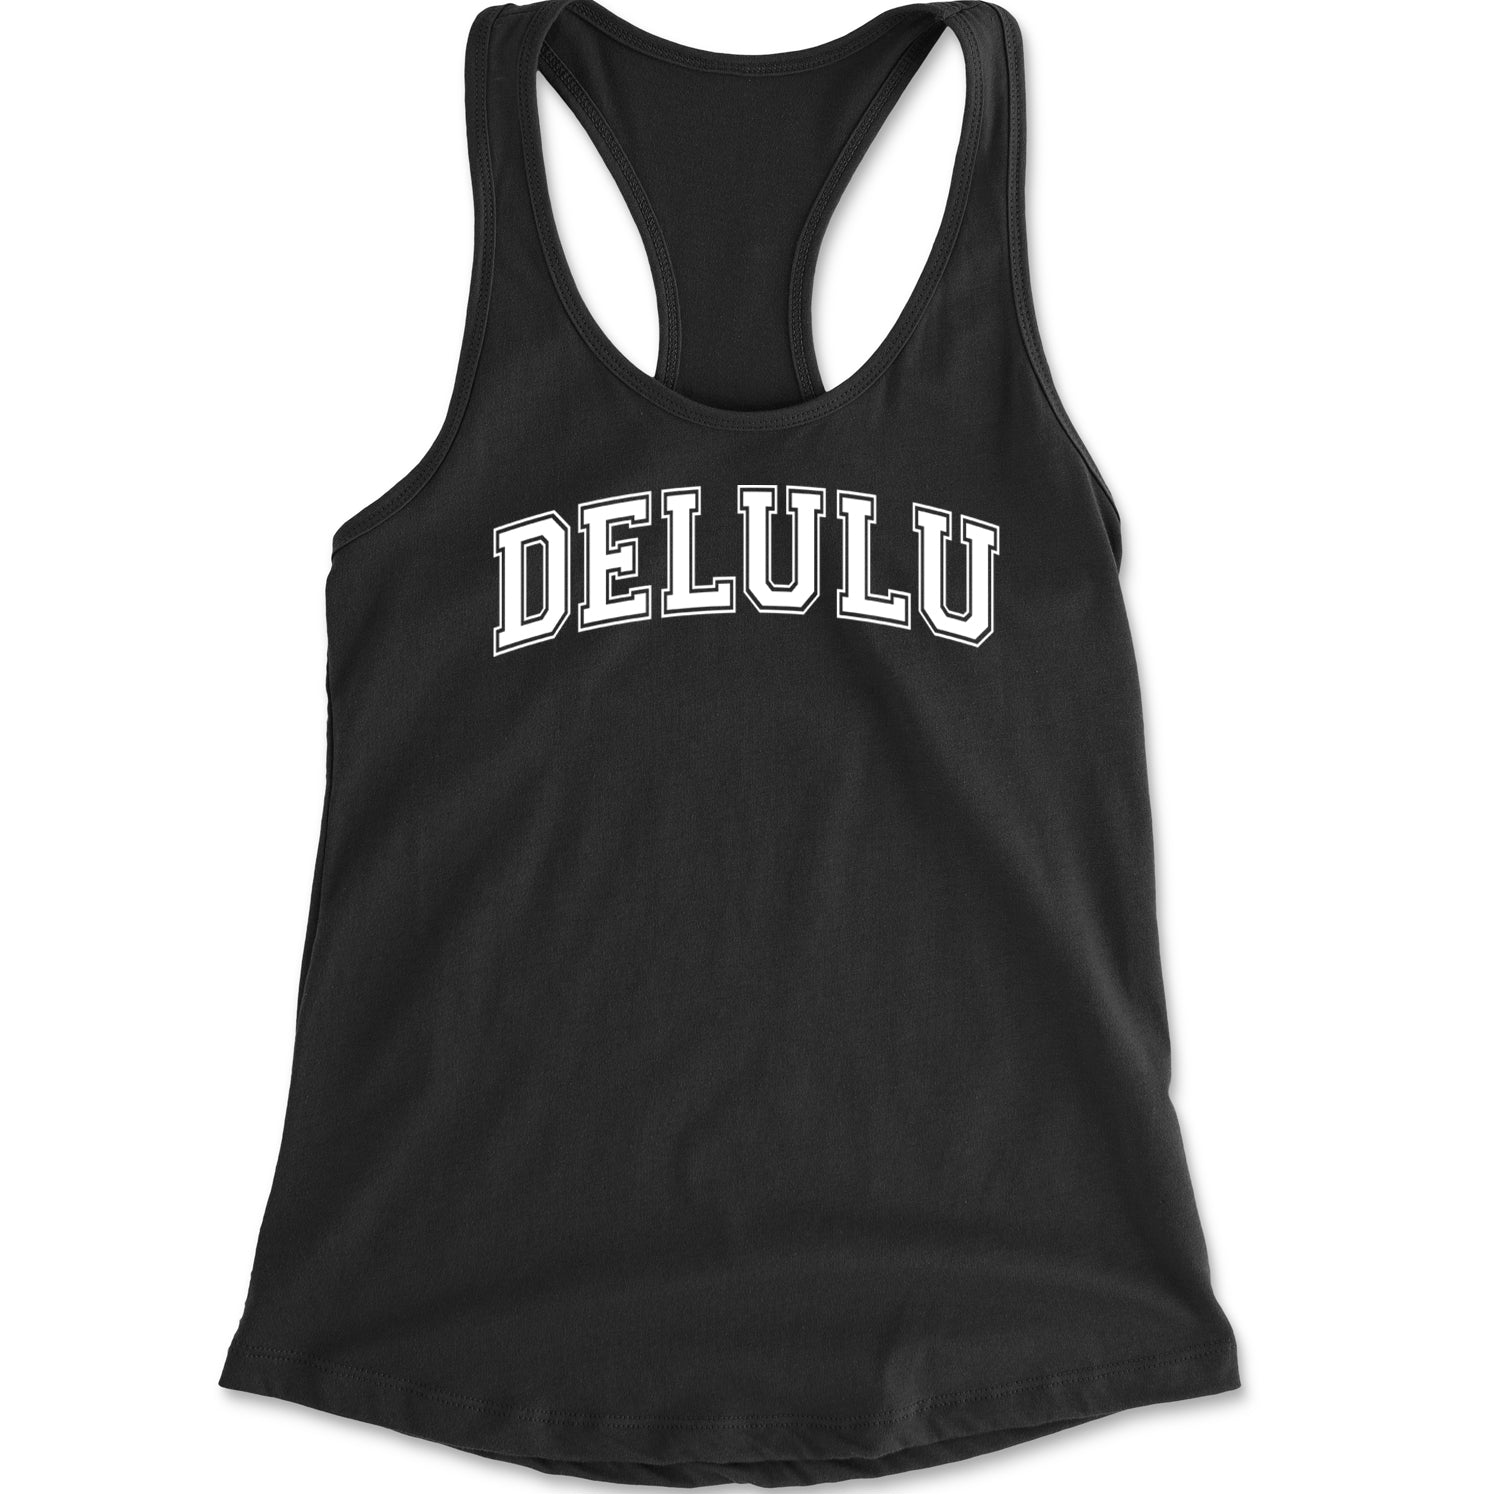 Delulu Delusional Light Hearted Racerback Tank Top for Women